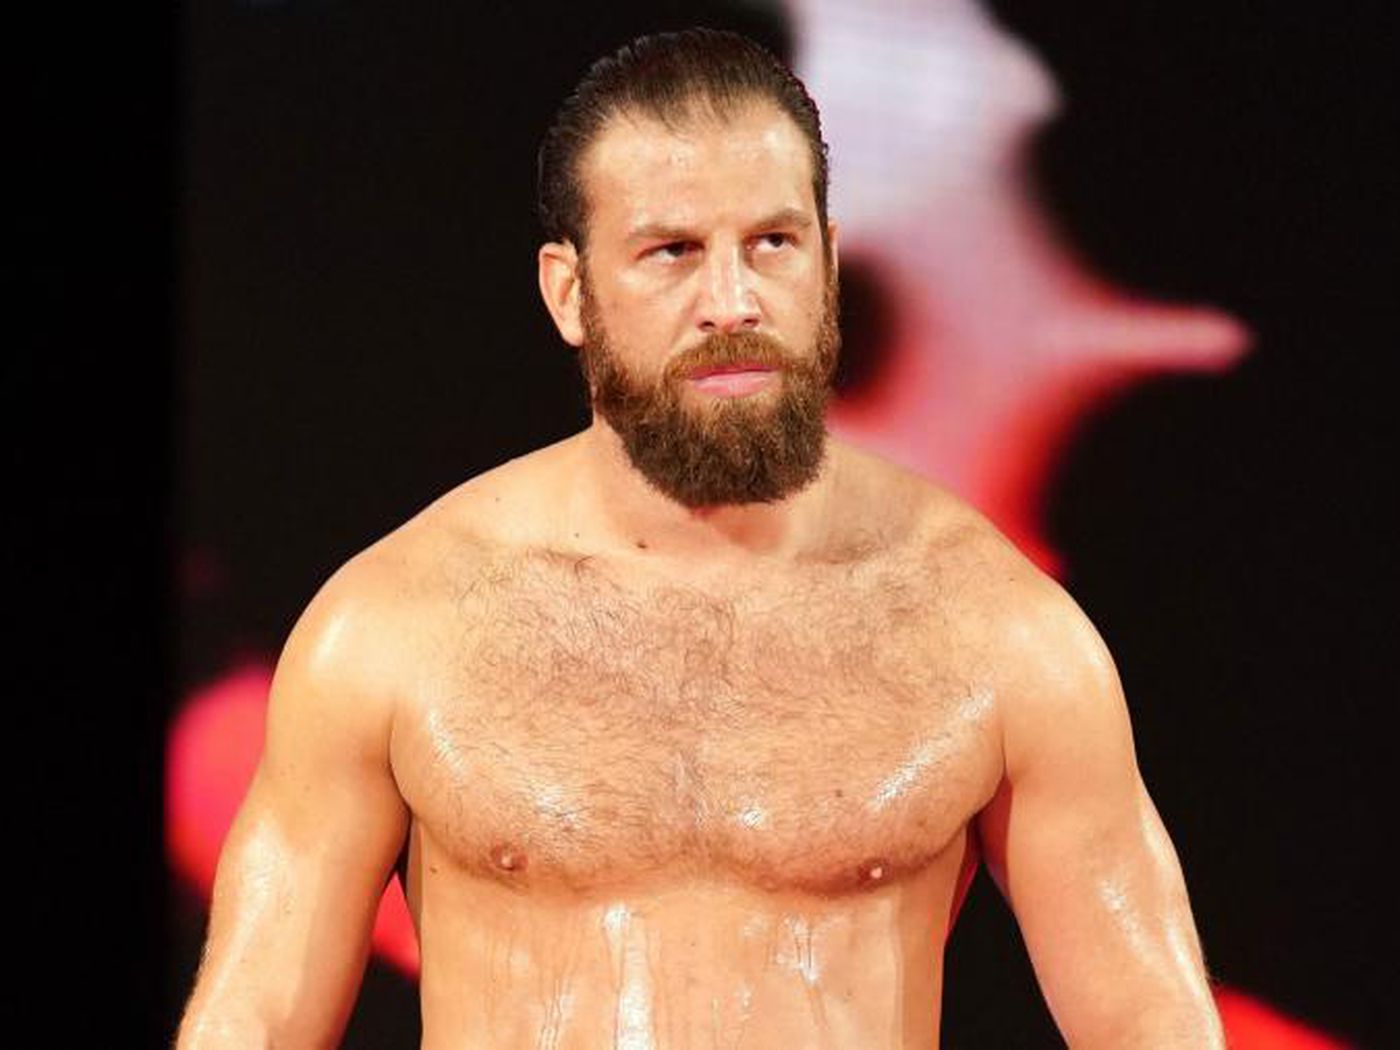 WWE PR Rep Told Reporter Asking About Drew Gulak It Was A “Dumb Thing To Do” [Video]